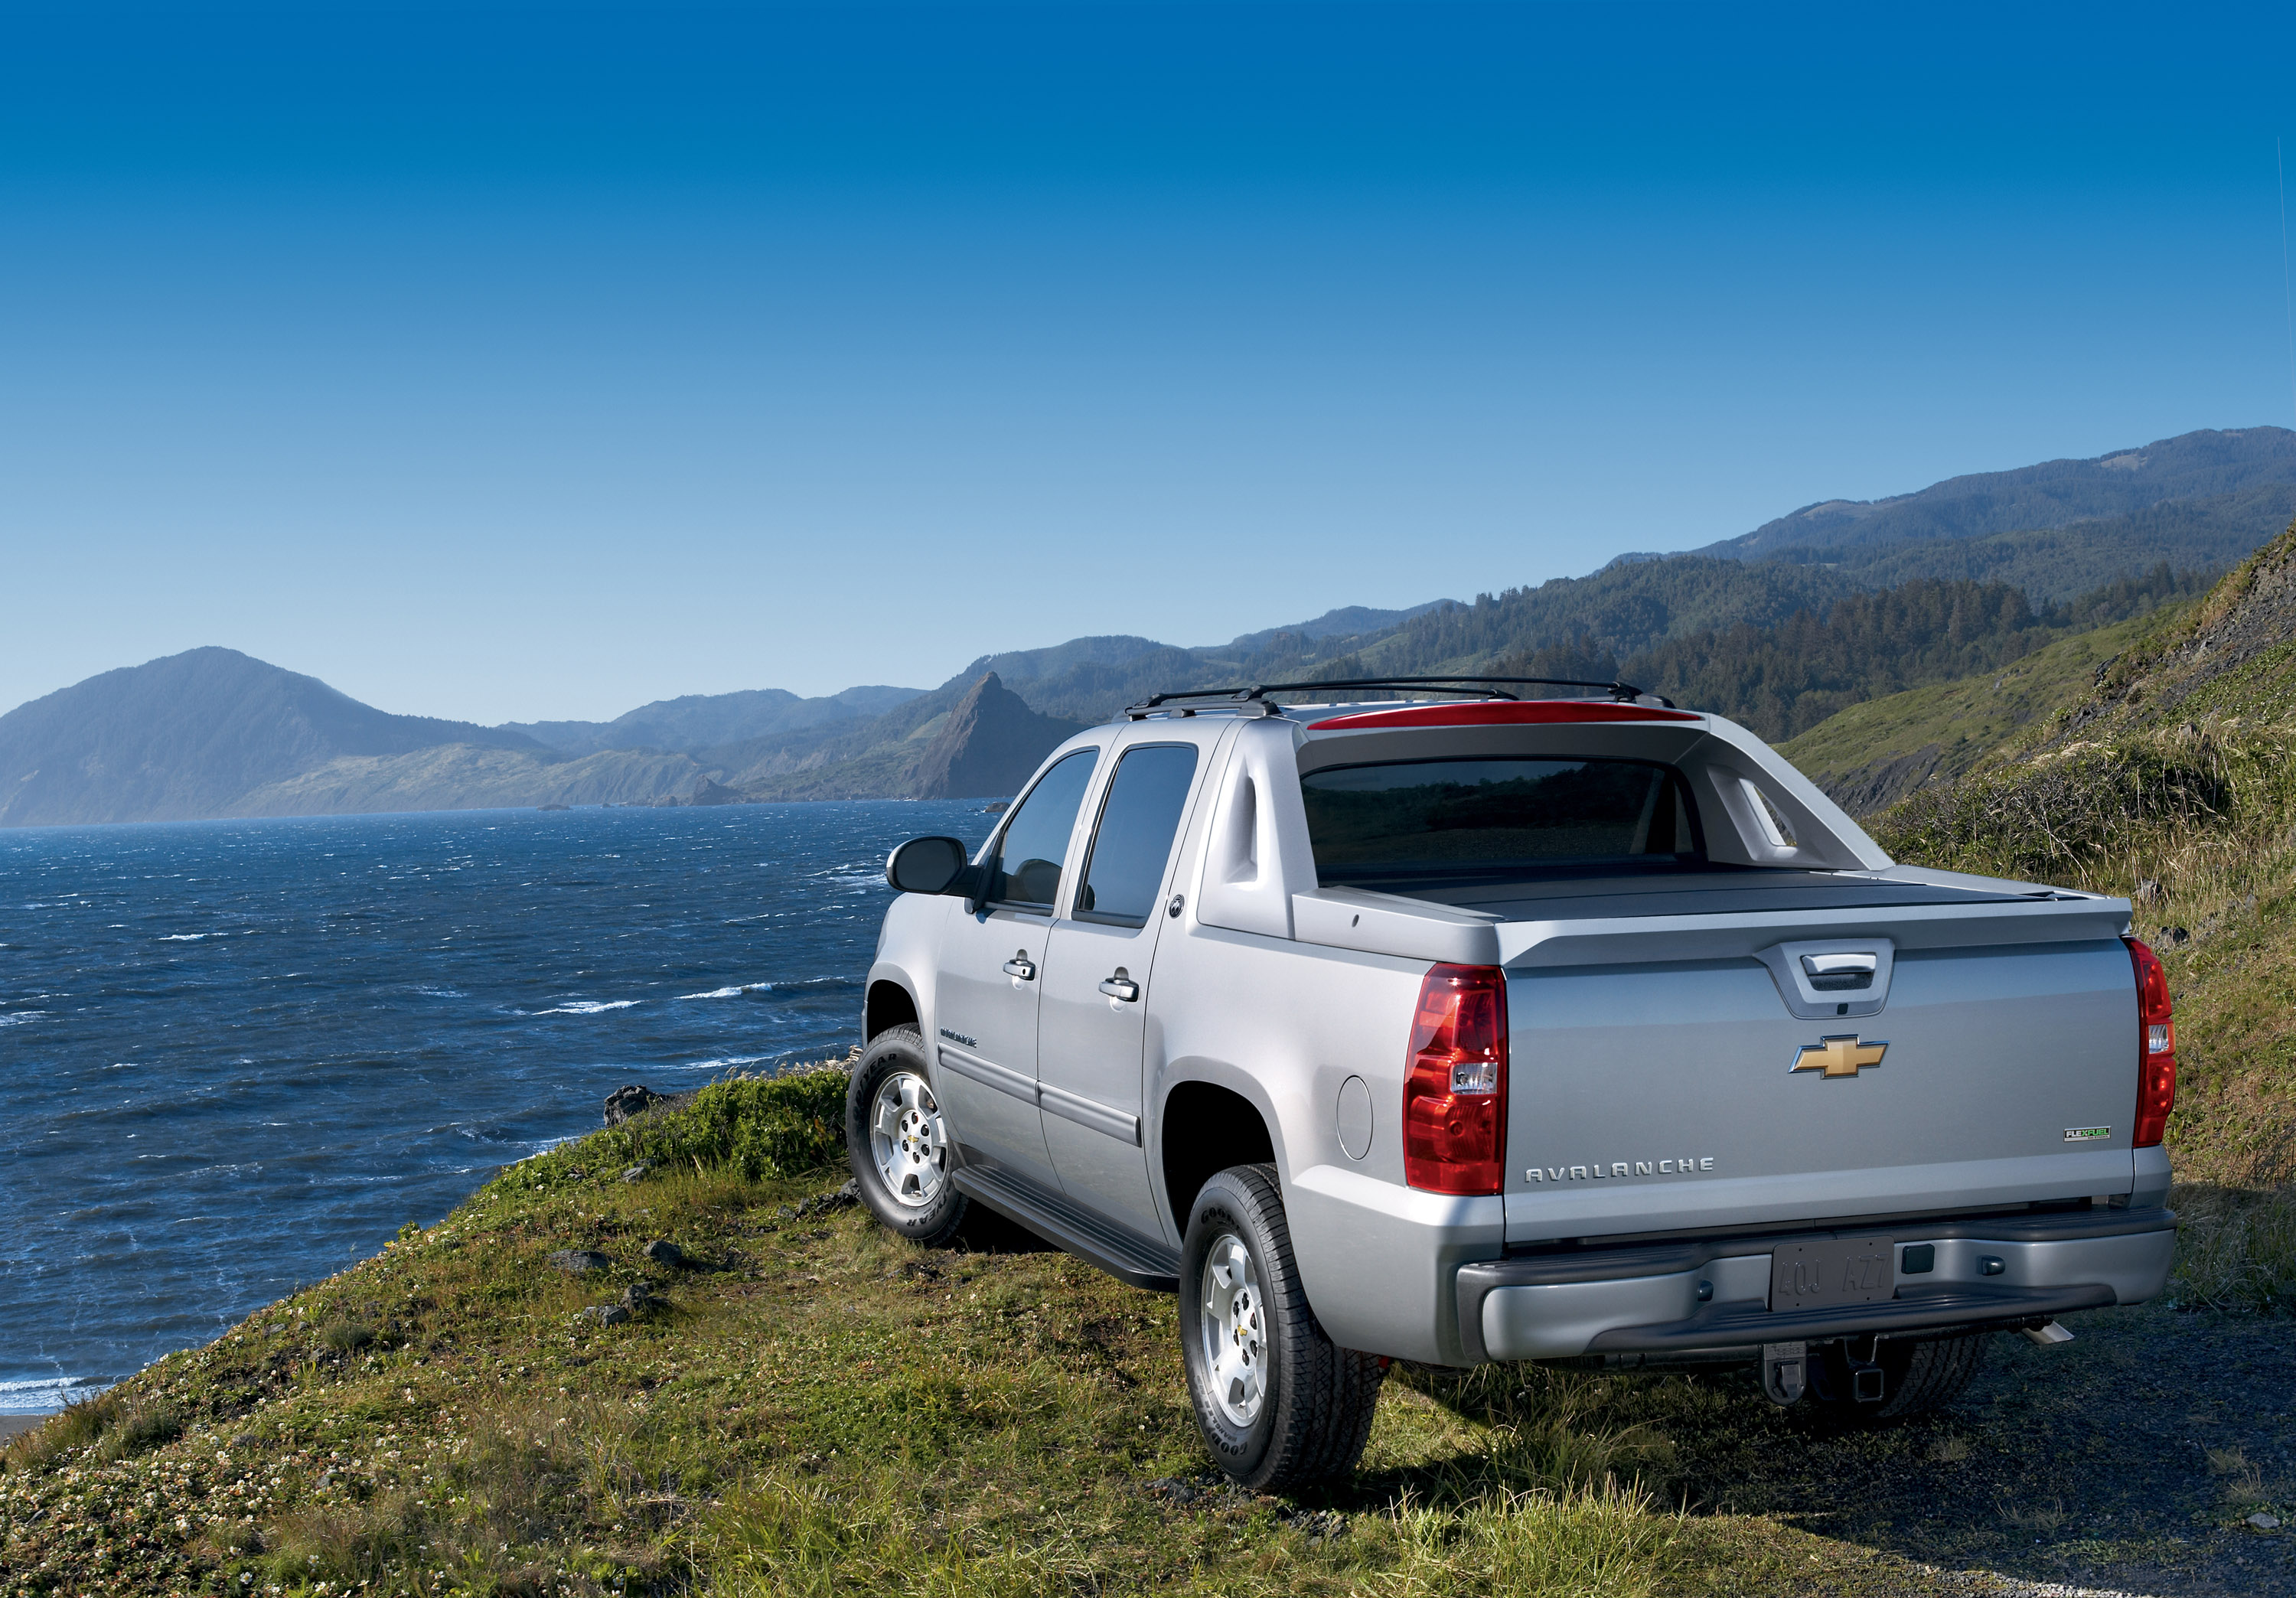 2013 Chevy Avalanche Likely To Have Paint Problems